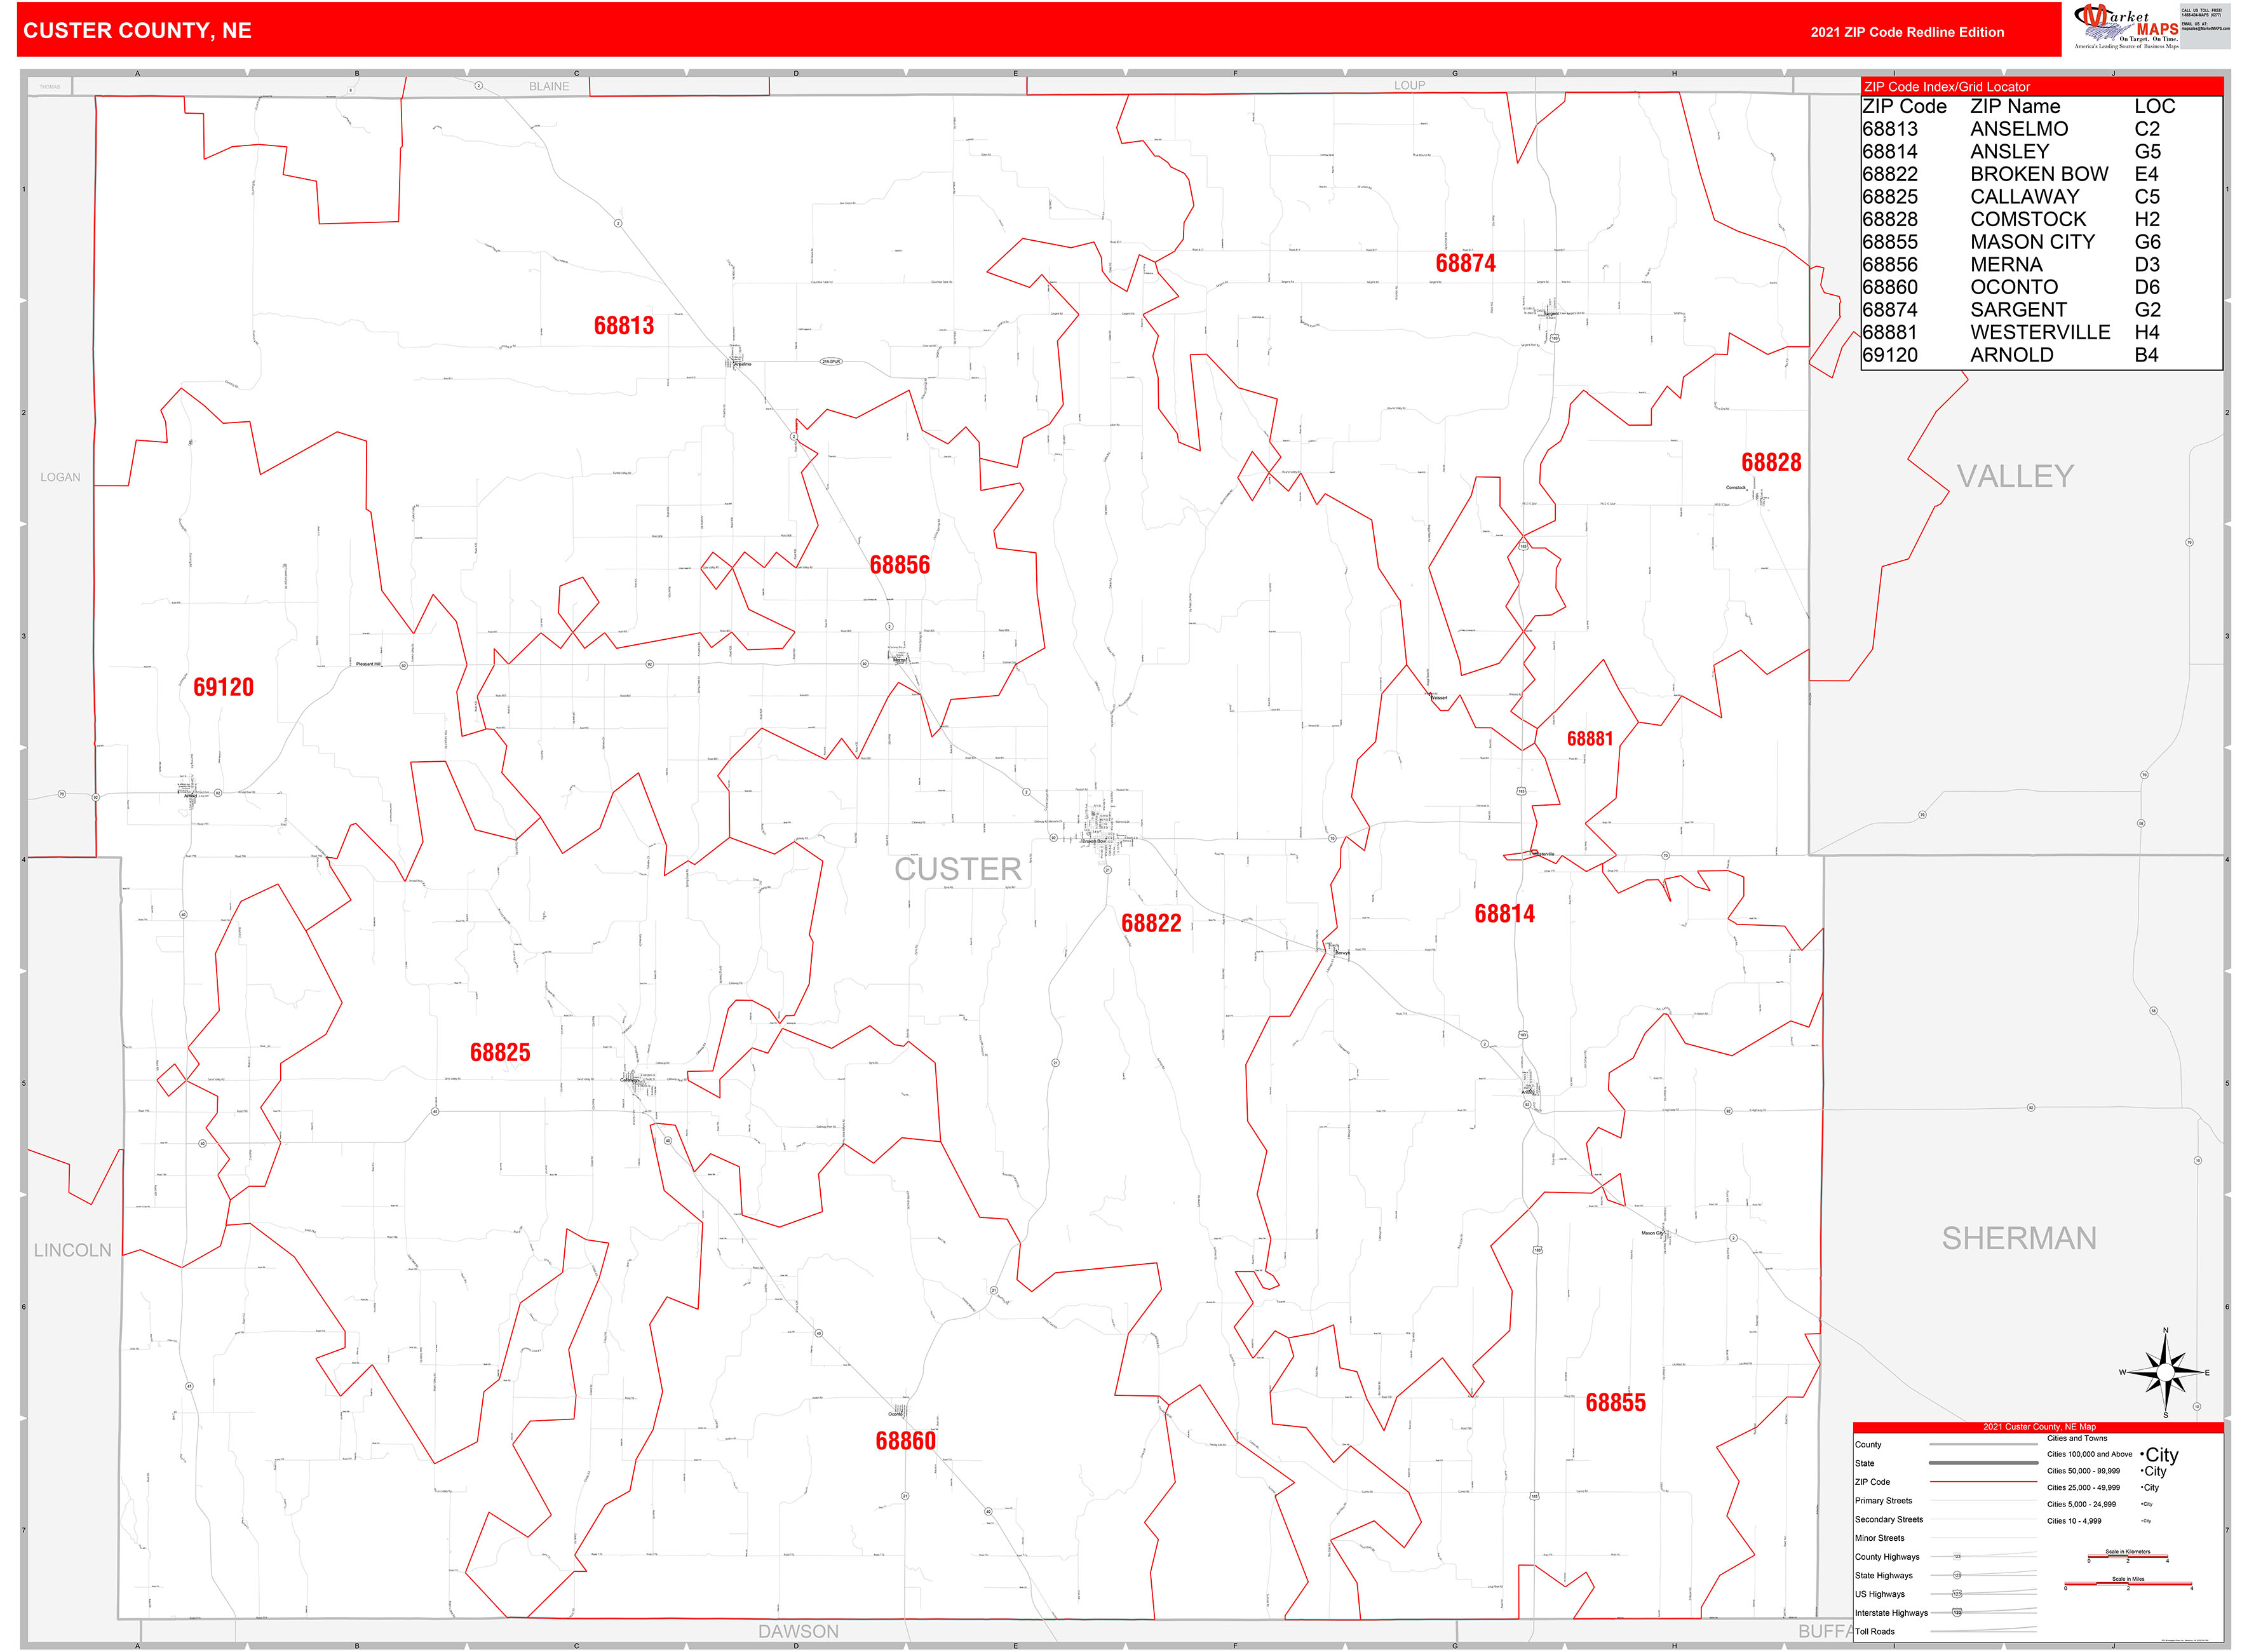 Custer County, NE Zip Code Wall Map Red Line Style by MarketMAPS